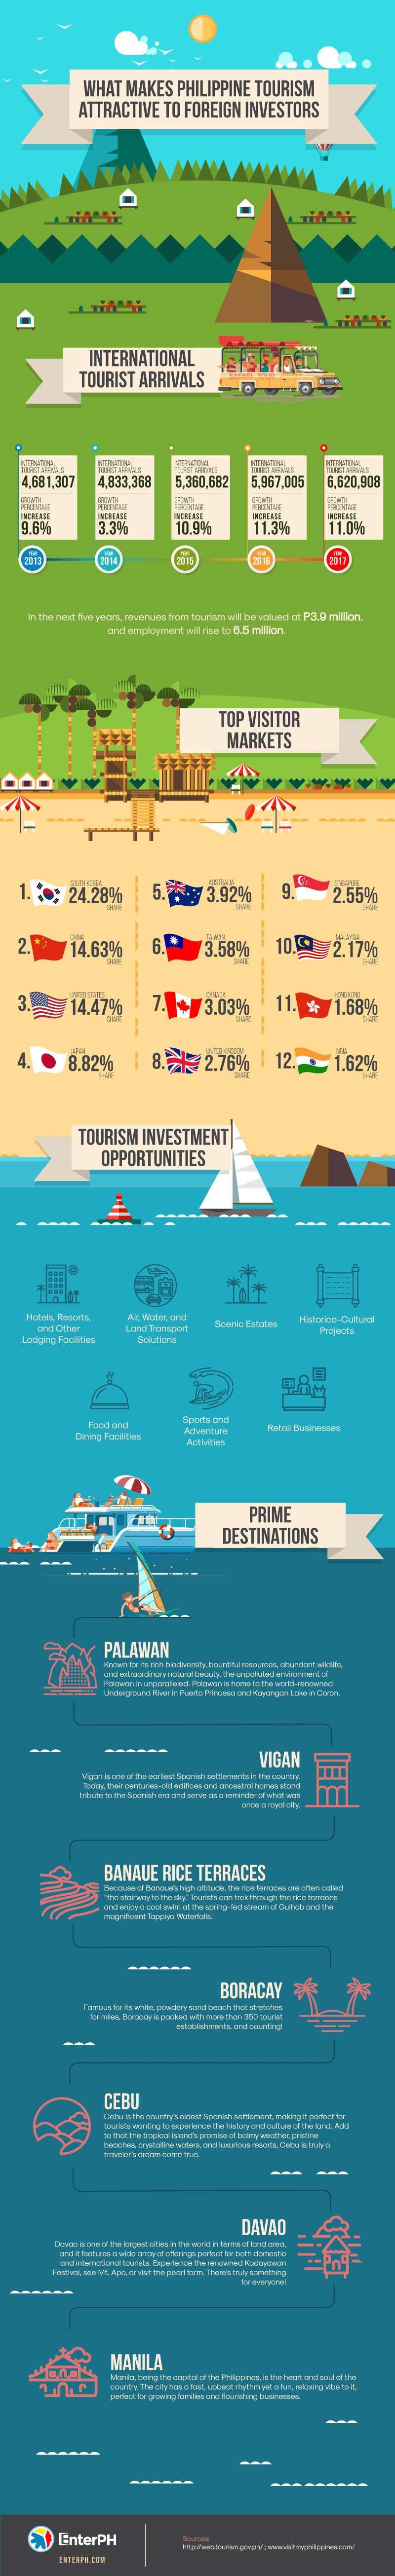 What-Makes-Philippine-Tourism-Attractive-to-Foreign-Investors